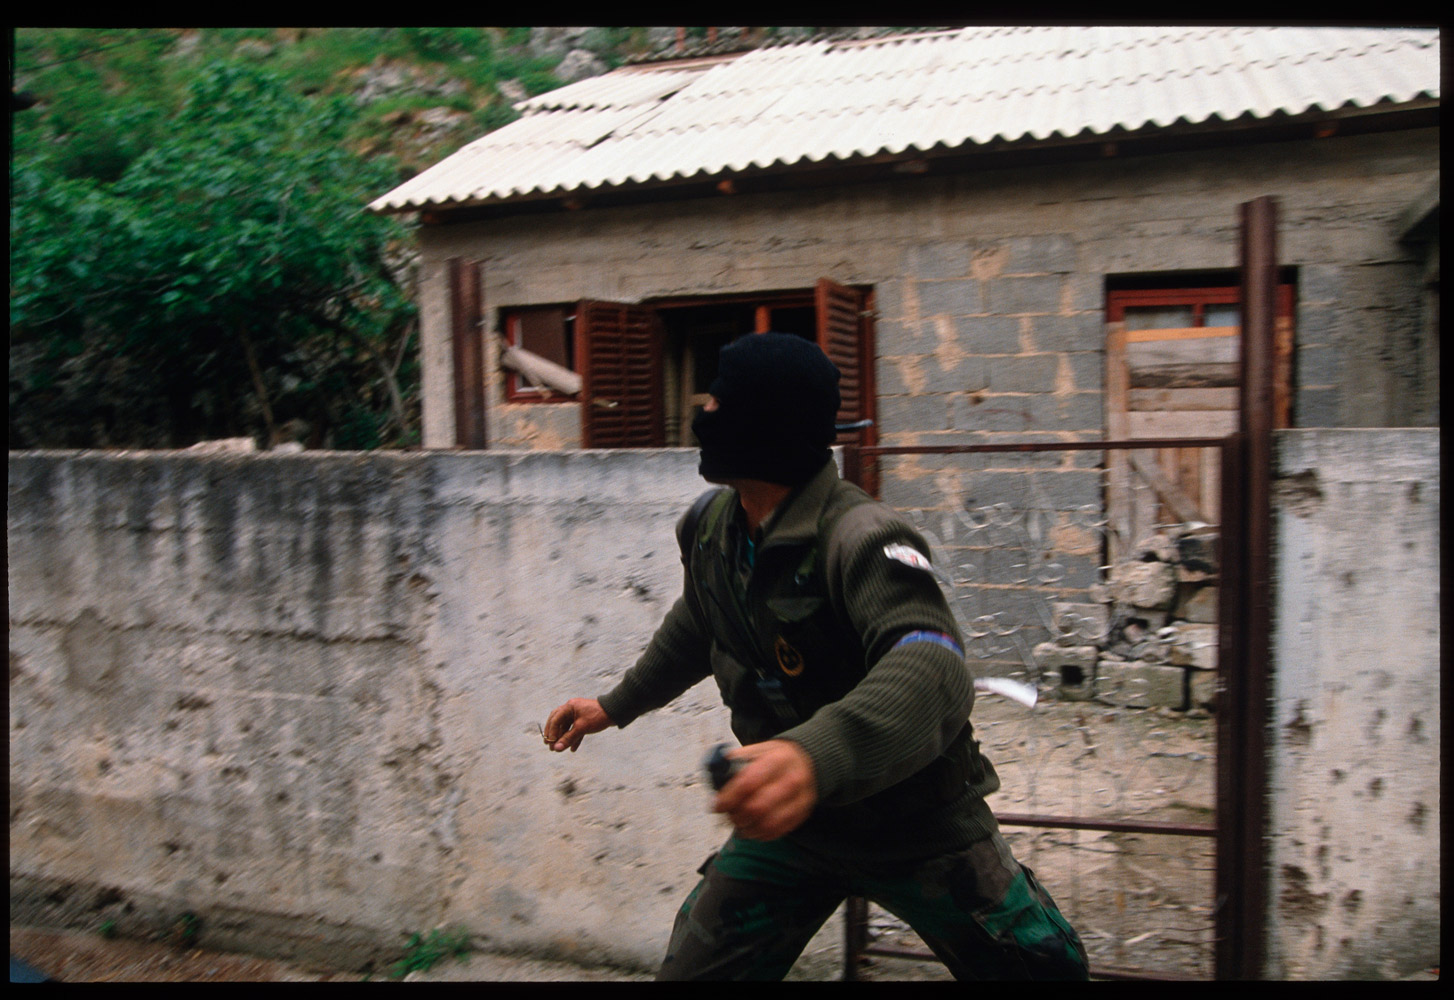 May 1993. Mostar. No other conflict took so much out of me emotionally and physically. In the beginning of the break up of Yugoslavia back in the summer of 1991, all sides were approachable—Bosnians, Croats and Serbs alike. It became hard to fathom why a group of people, who grew up as children together, with Bosnians, Croats and Serbs even marrying each other—how could they now allow politicians to drive such a nationalistic, ethnic web between them, causing a blind nationalism that swept through village after village? Extreme hatred, led by idiots.By the time I left in 1996, I had to run away never wanting to look back. For, I felt, I had just witnessed mankind at its worst, something that even today still affects me, how simply mankind can be led astray from moral behavior, with politicians and media that can use hate laced with patriotism to drive their wicked agendas.